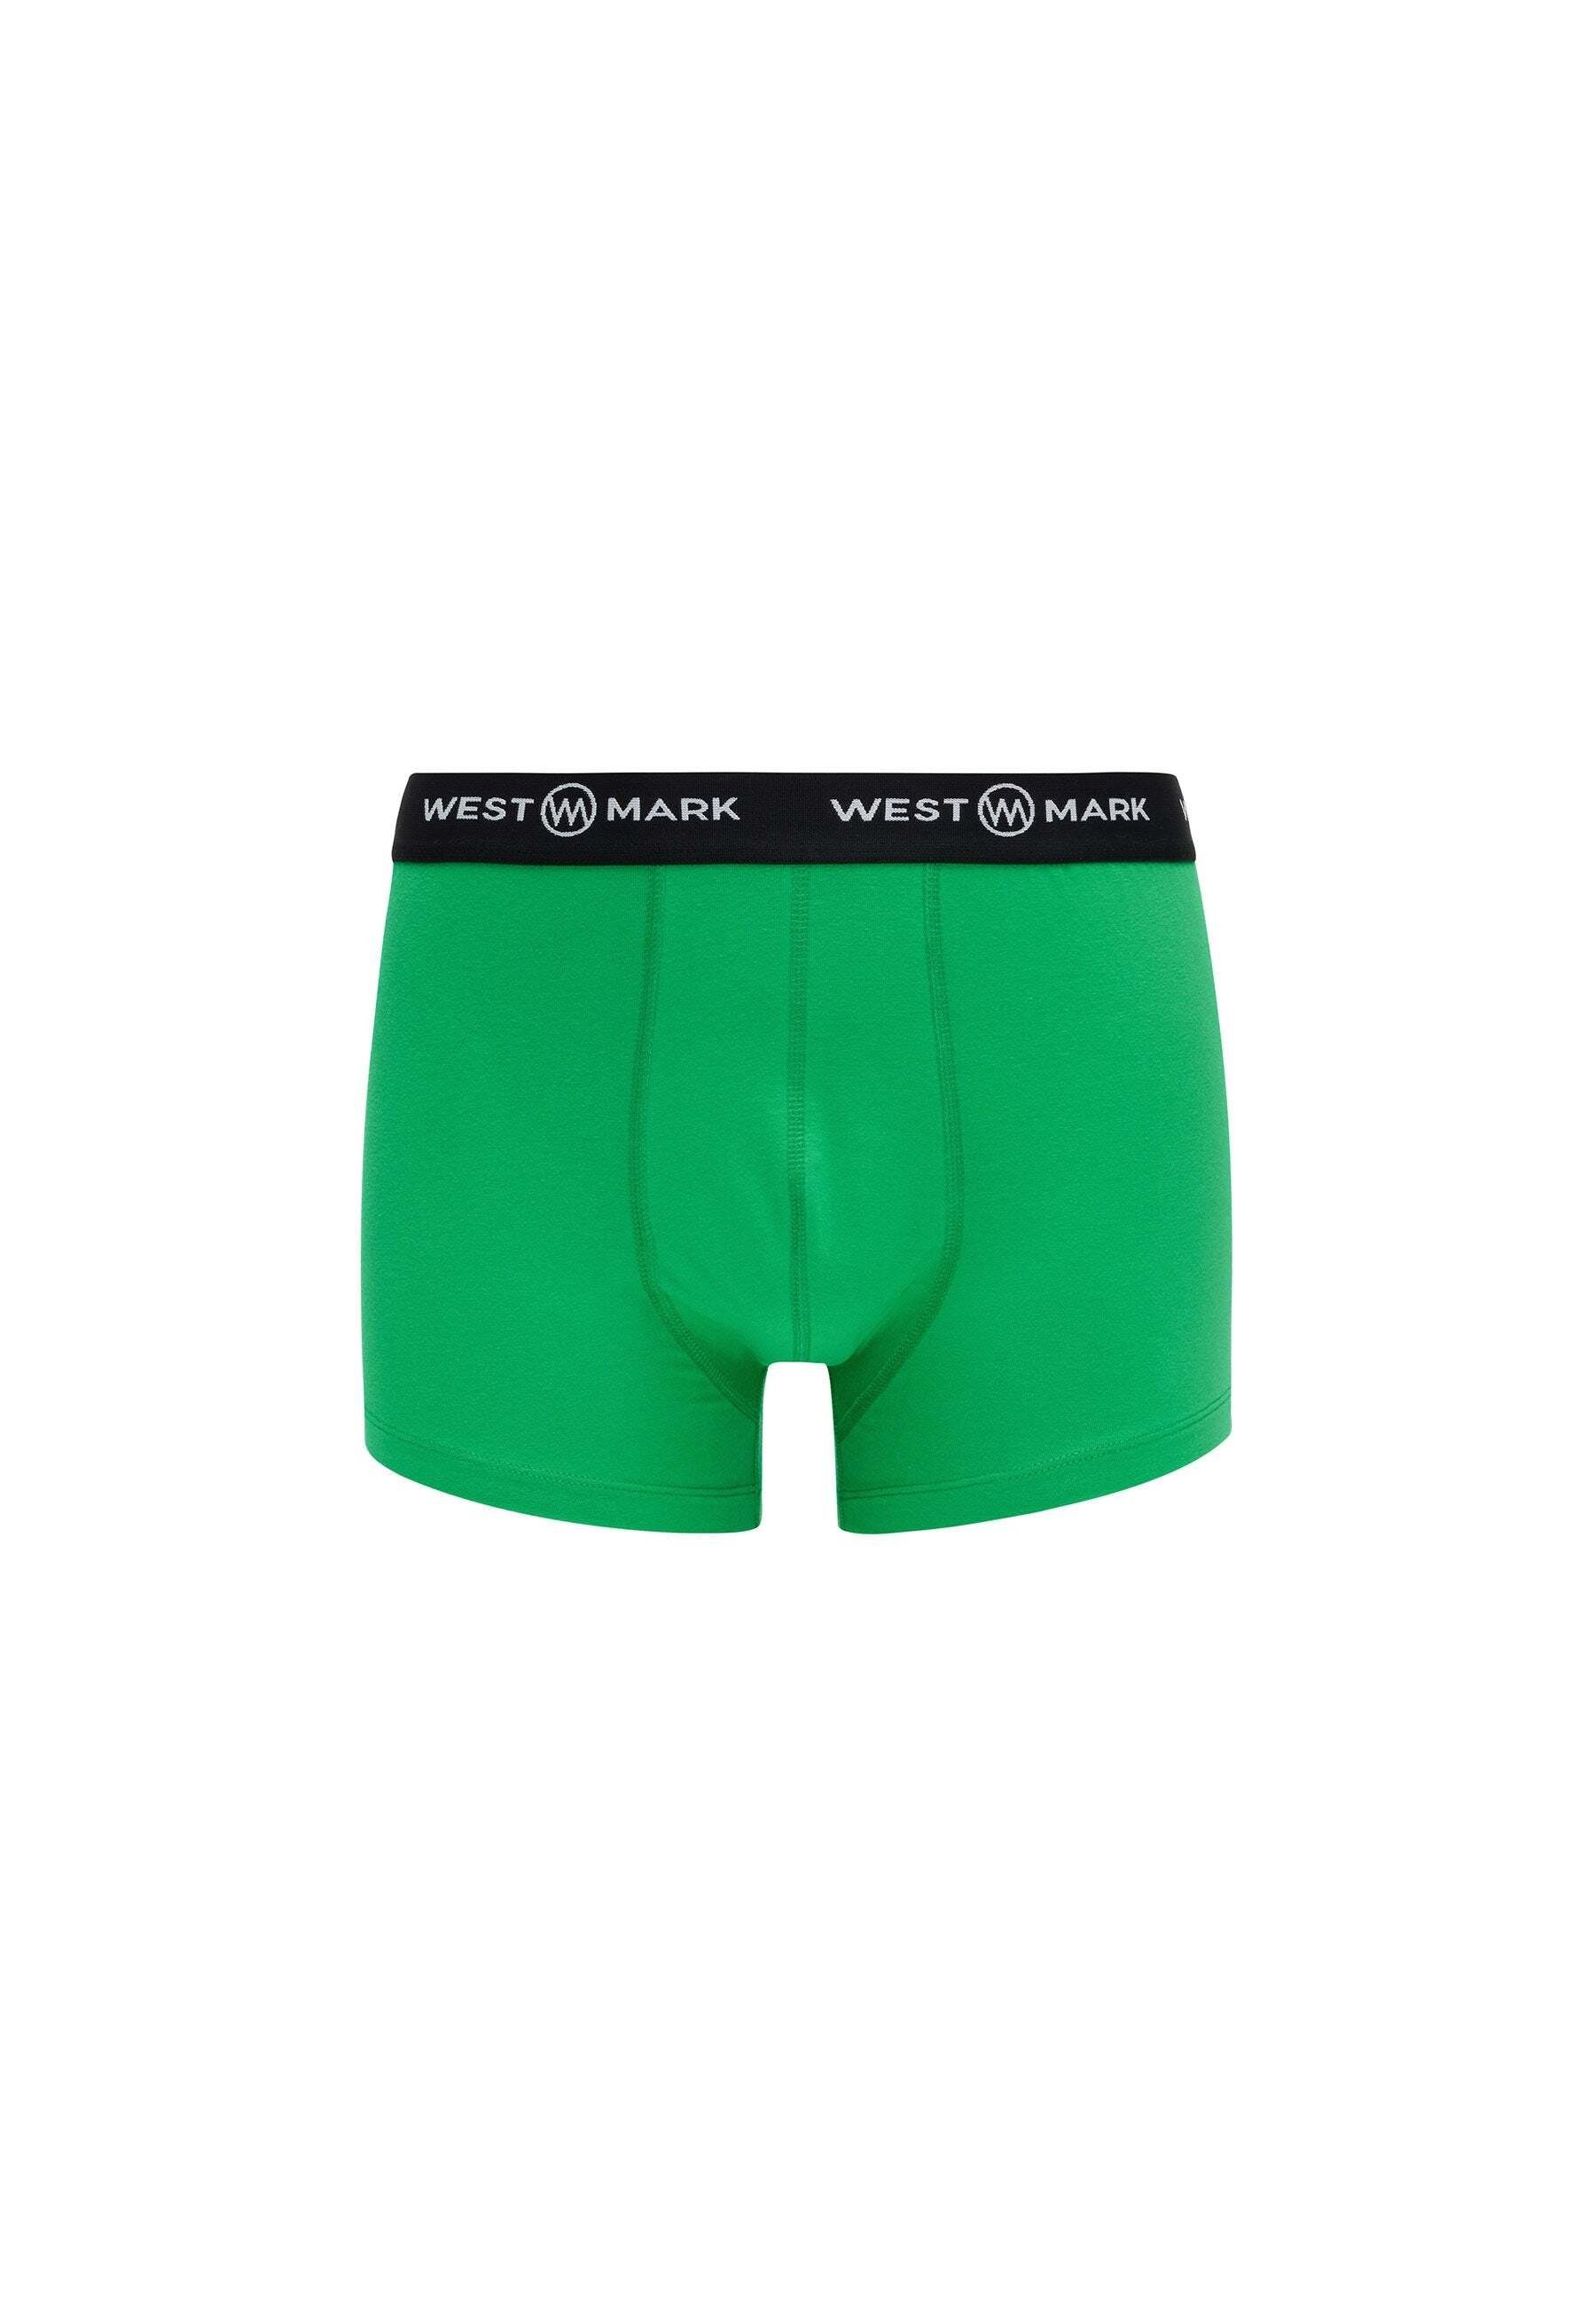 (3-PACK WMABSTRACT White LONDON Boxershorts WESTMARK 3-PACK OSCAR Set, AOP, 3-St) Green Green,